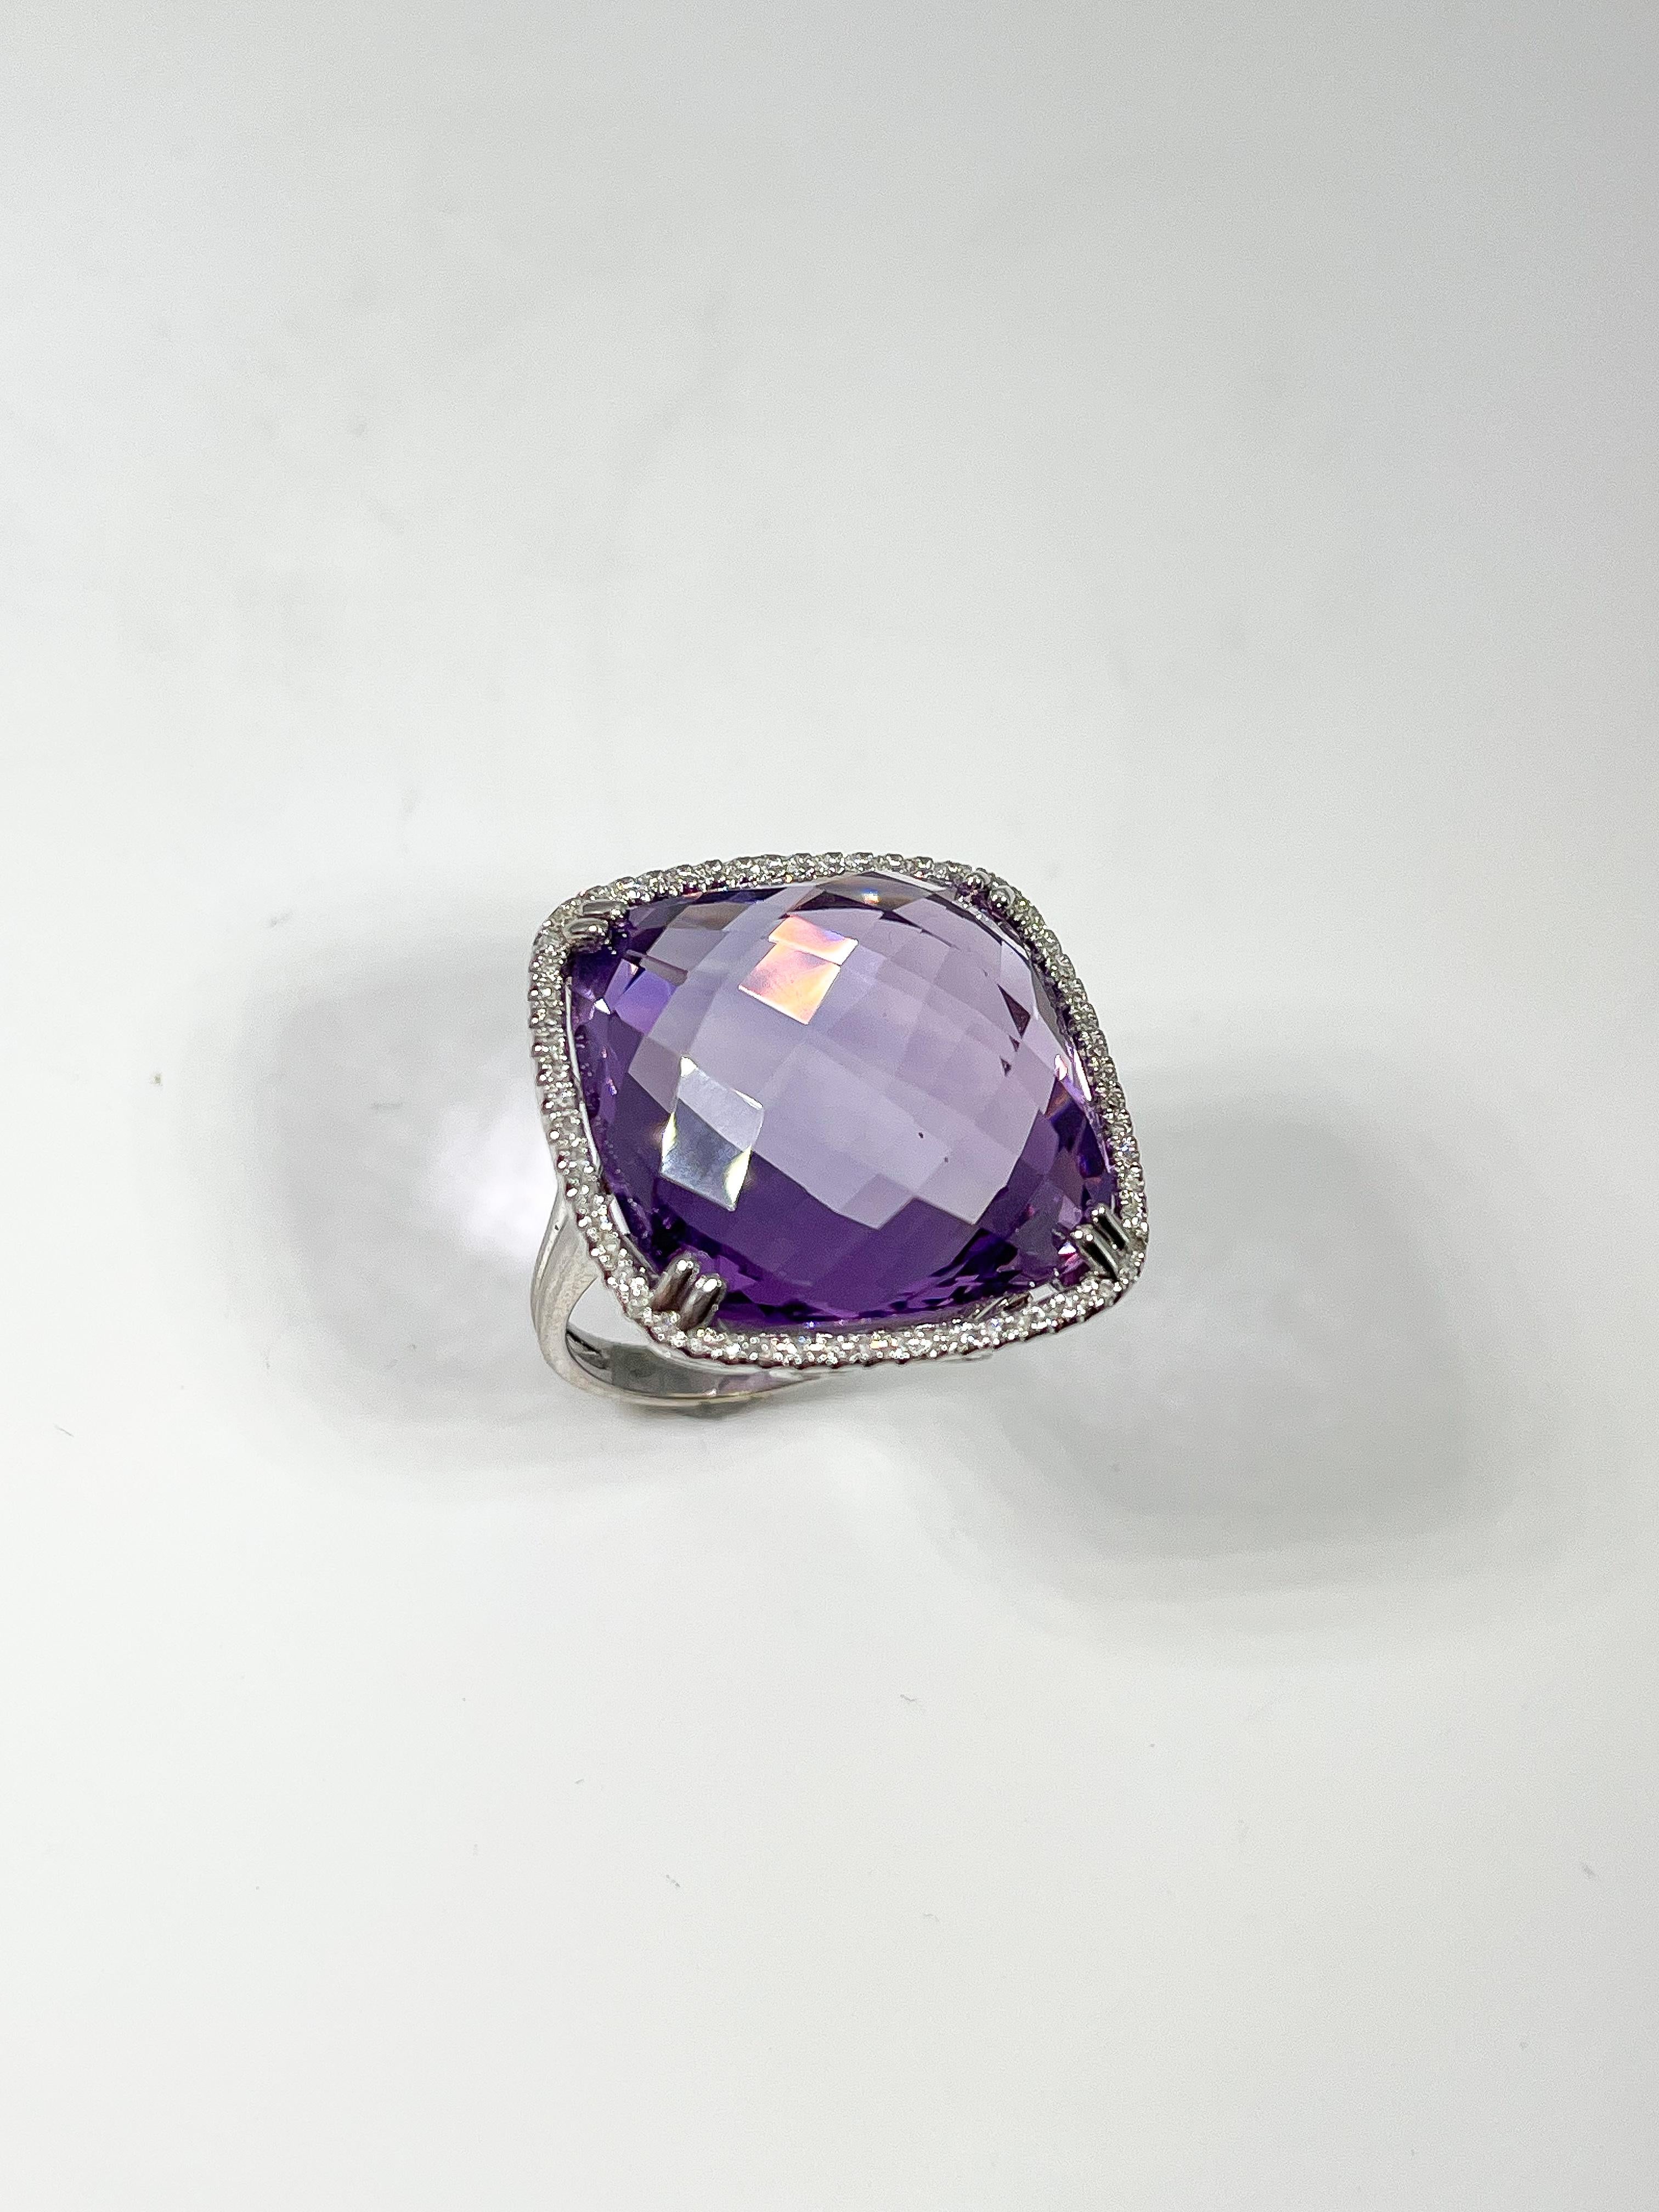 14k white gold cushion cut amethyst and diamond 1 CTW halo fashion ring. Ring has a split shank and scrolling detail on the under gallery. Amethyst measures 19.5 x 19.5 mm, ring is a size 6 1/2 and has a weight of 9.6 grams.